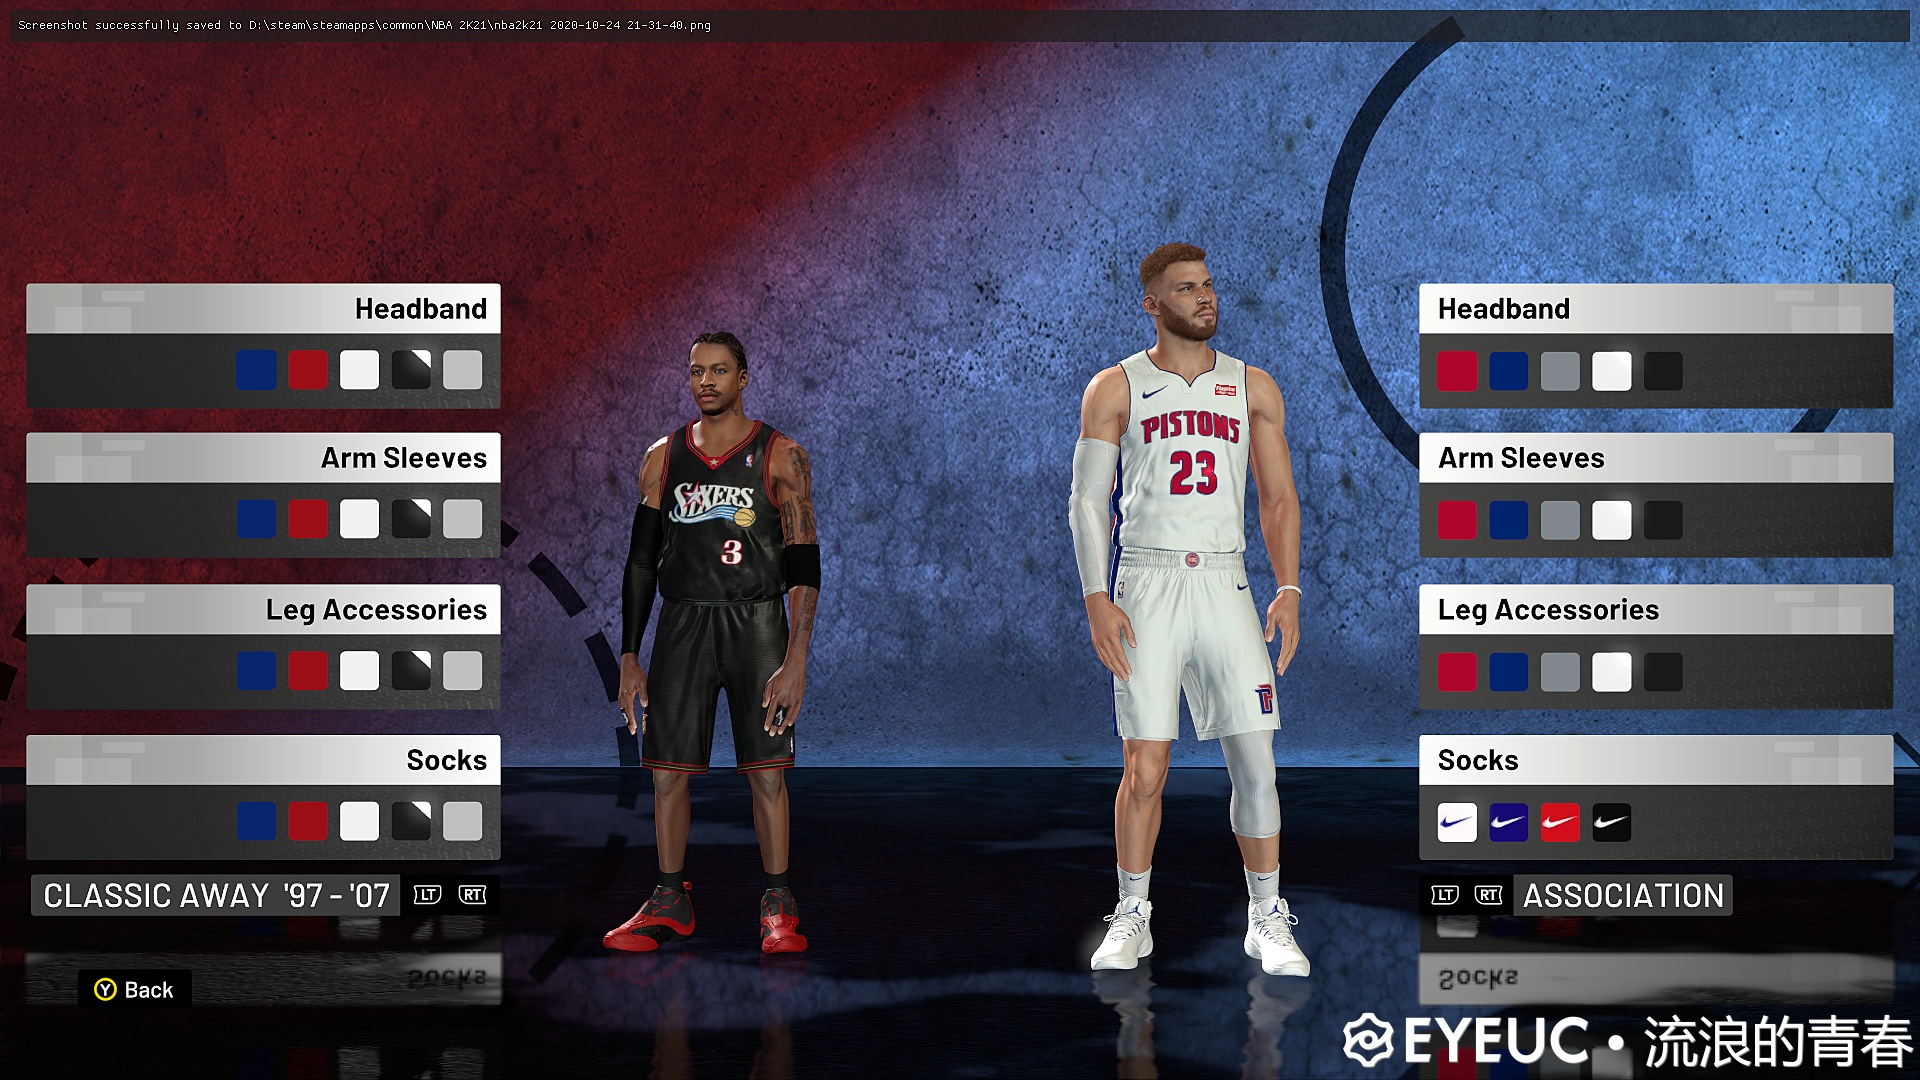 NBA 2K21 Retro Loose Jersey By youth [FOR 2K21] - NBA 2K Updates Roster Update Cyberface Etc